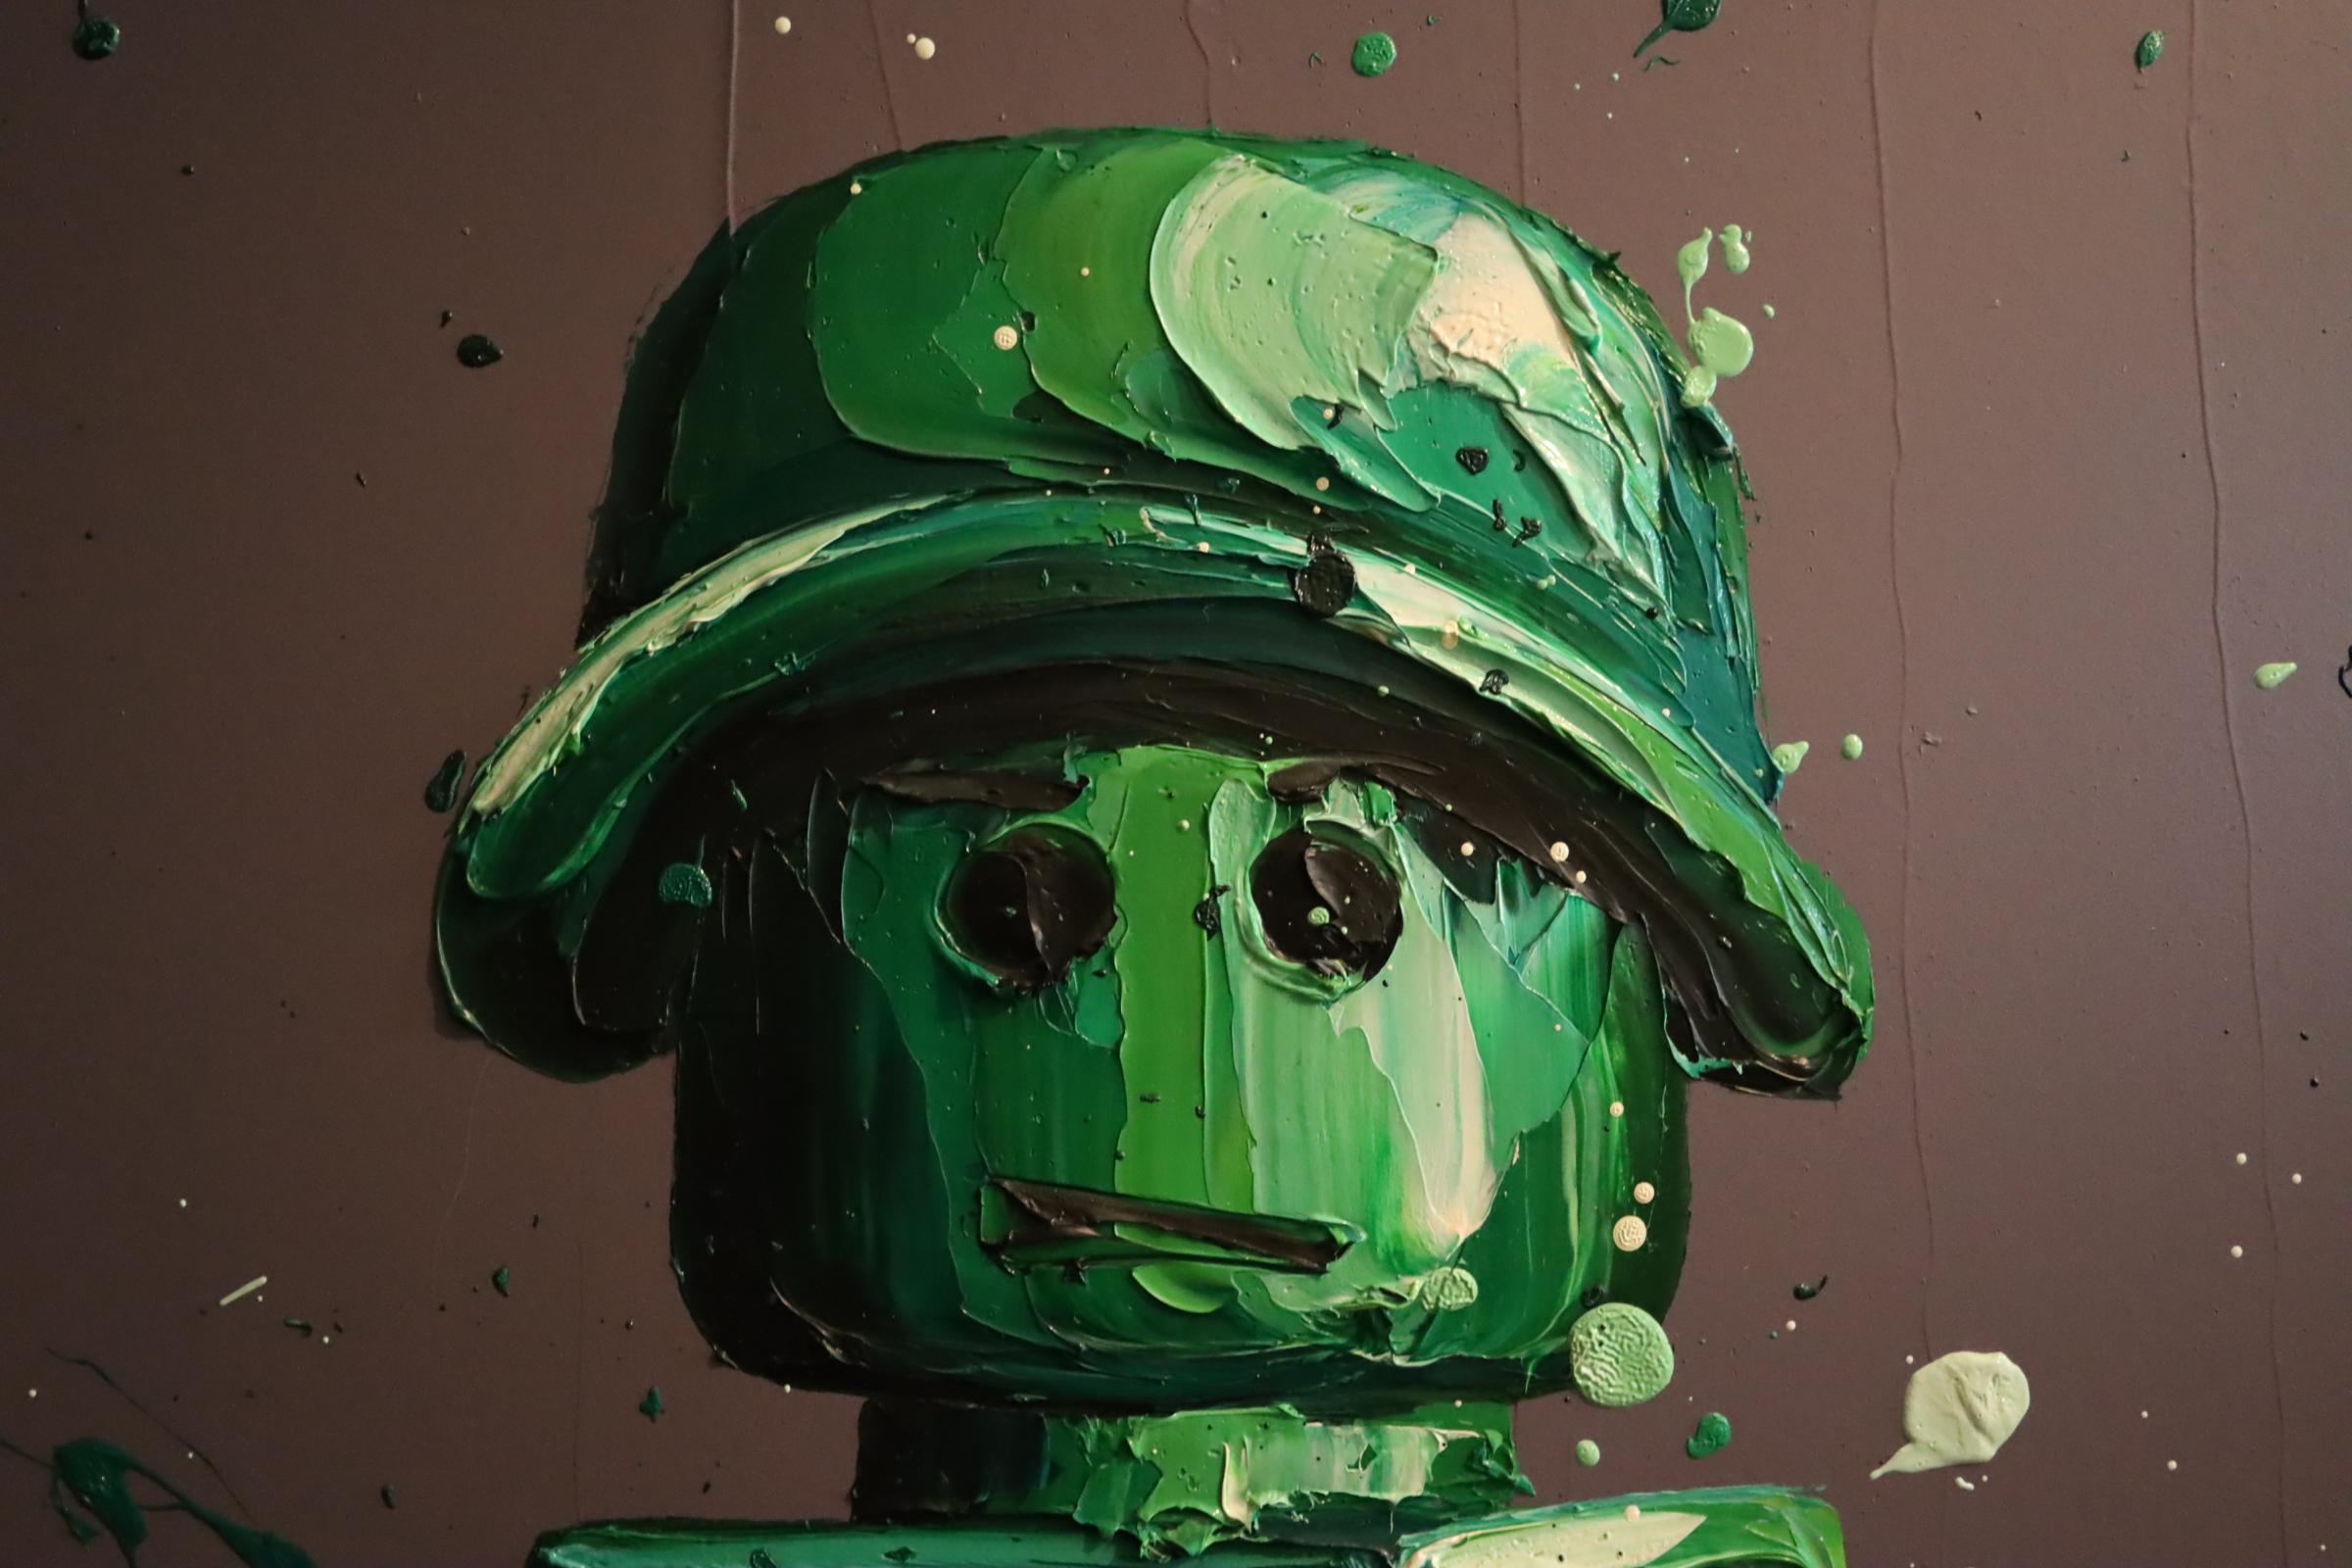 Ryan' Lego Soldier by Paul Oz.
Original piece
Acrylic
Signed
Paul shows of incredible depth with the paint used in this painting.
This was acquired direct from Paul.
Paul Oz has a unique style, known as Britain's Explosive Artist; his work features